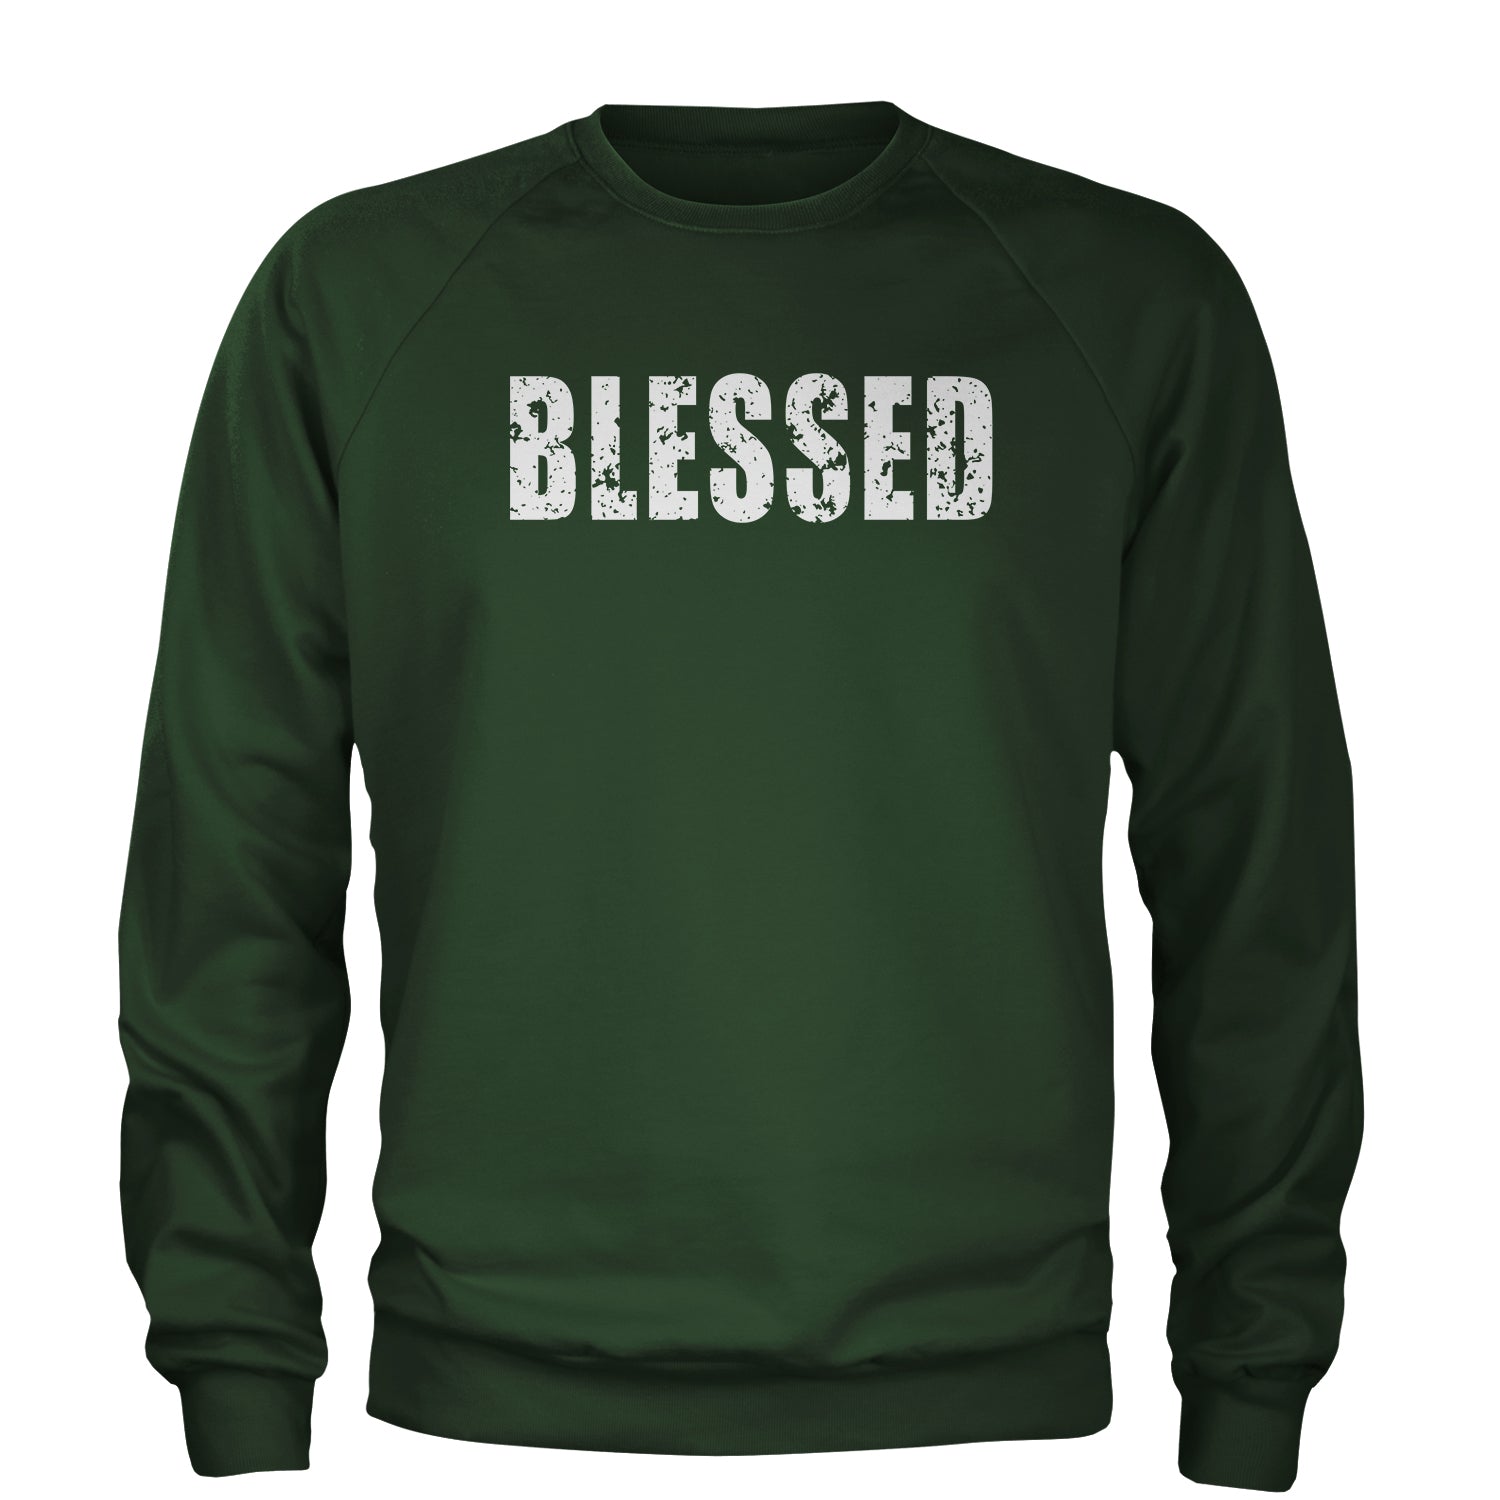 Blessed Religious Grateful Thankful Adult Crewneck Sweatshirt #expressiontees by Expression Tees